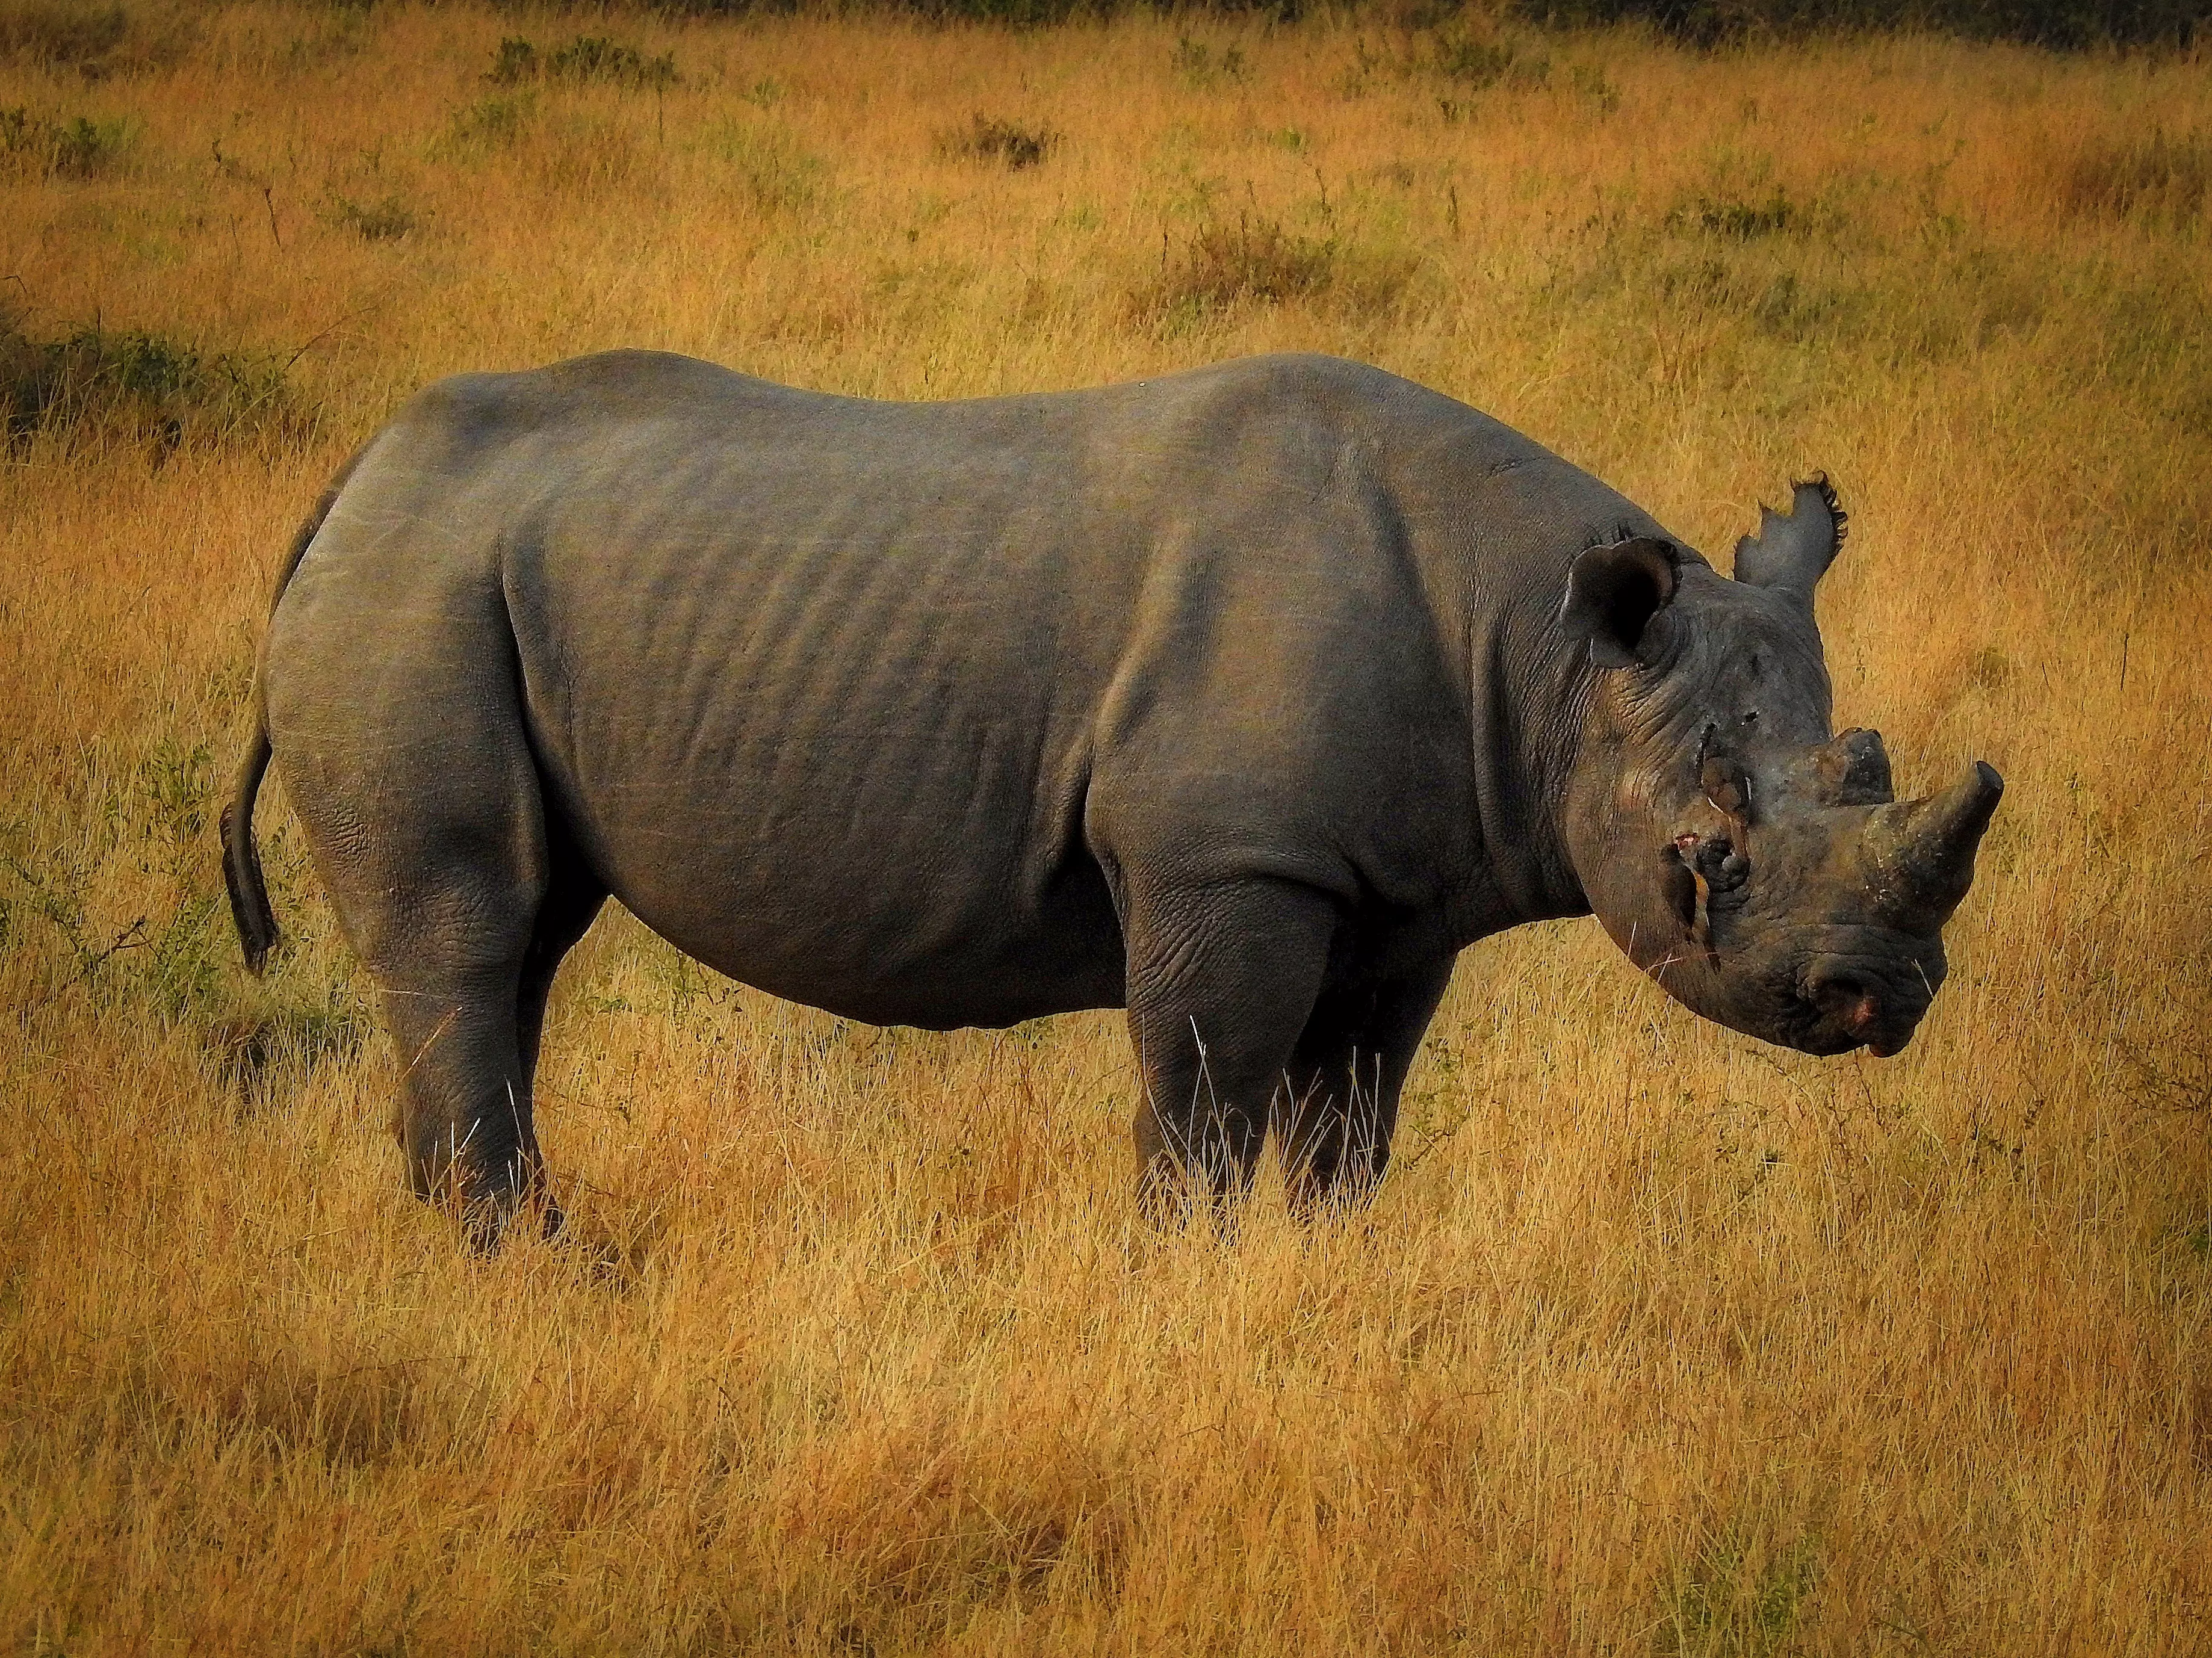 There is thought to be roughly 5,000 black rhinos still existing in the wild.